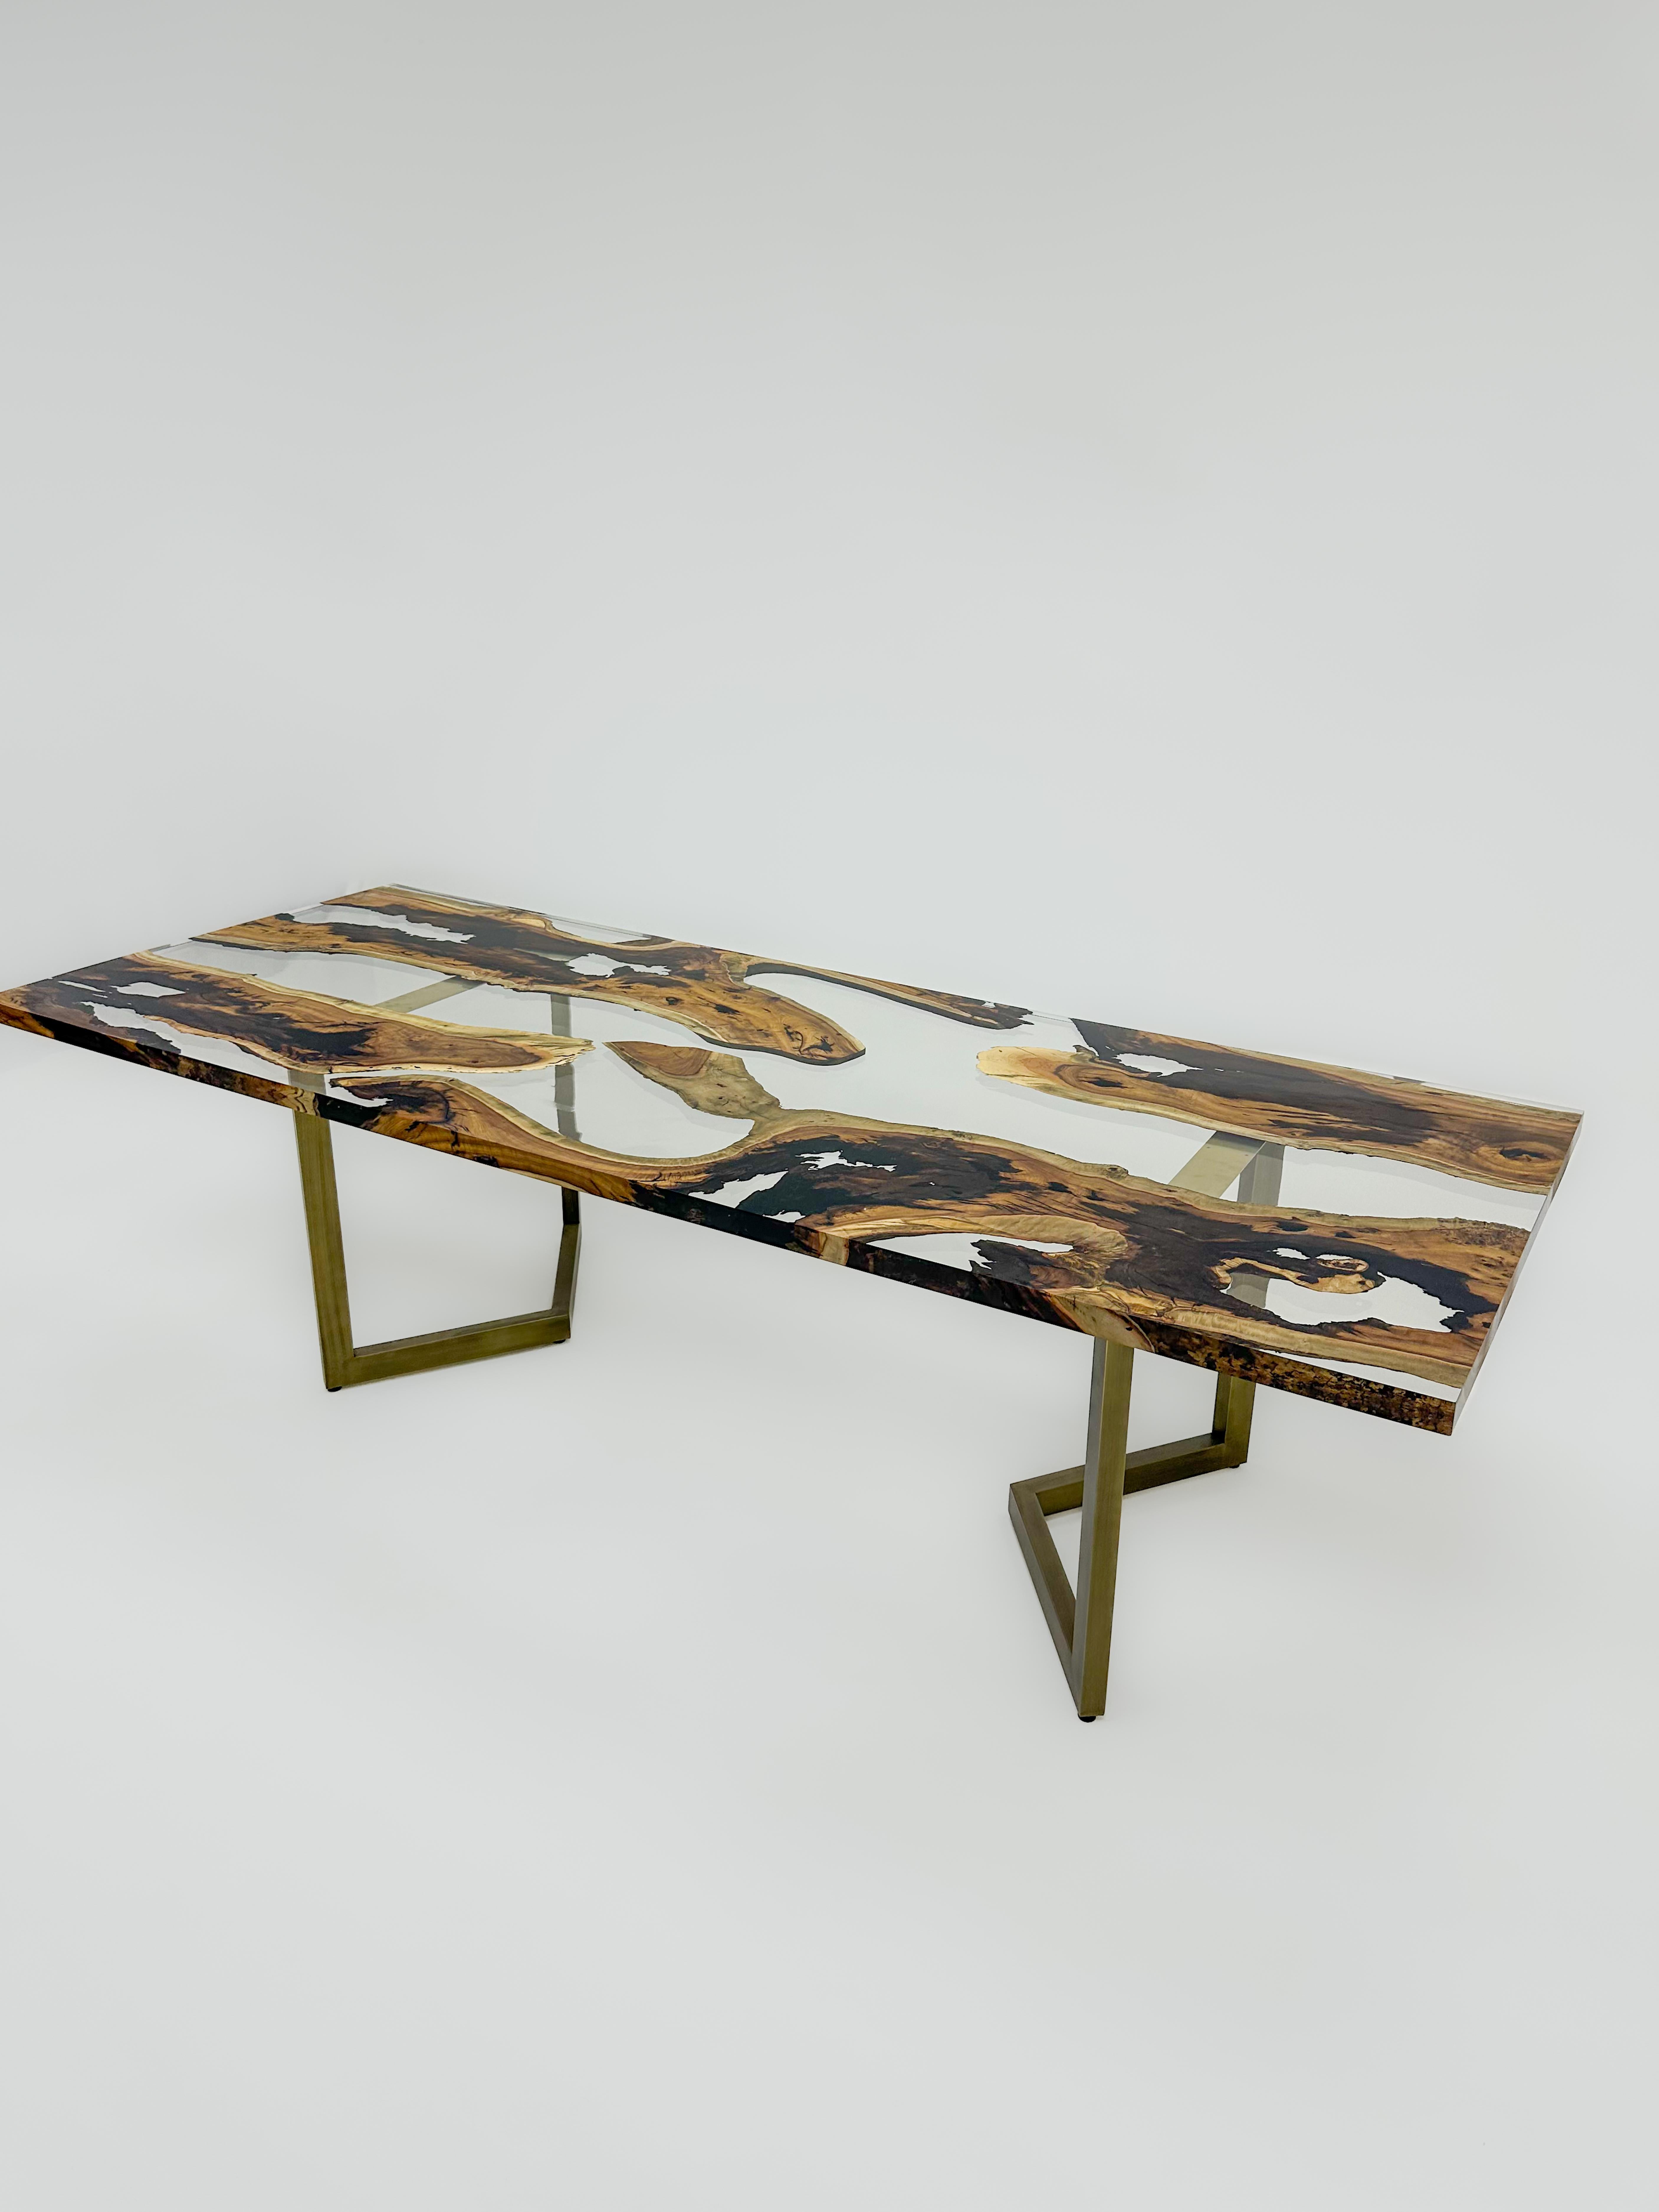 Hackberry Custom Clear Epoxy Resin Dining Table 

This table is made of 500 years old Hackberry Wood. The grains and texture of the wood describe what a natural walnut woods looks like.
It can be used as a dining table or as a conference table.